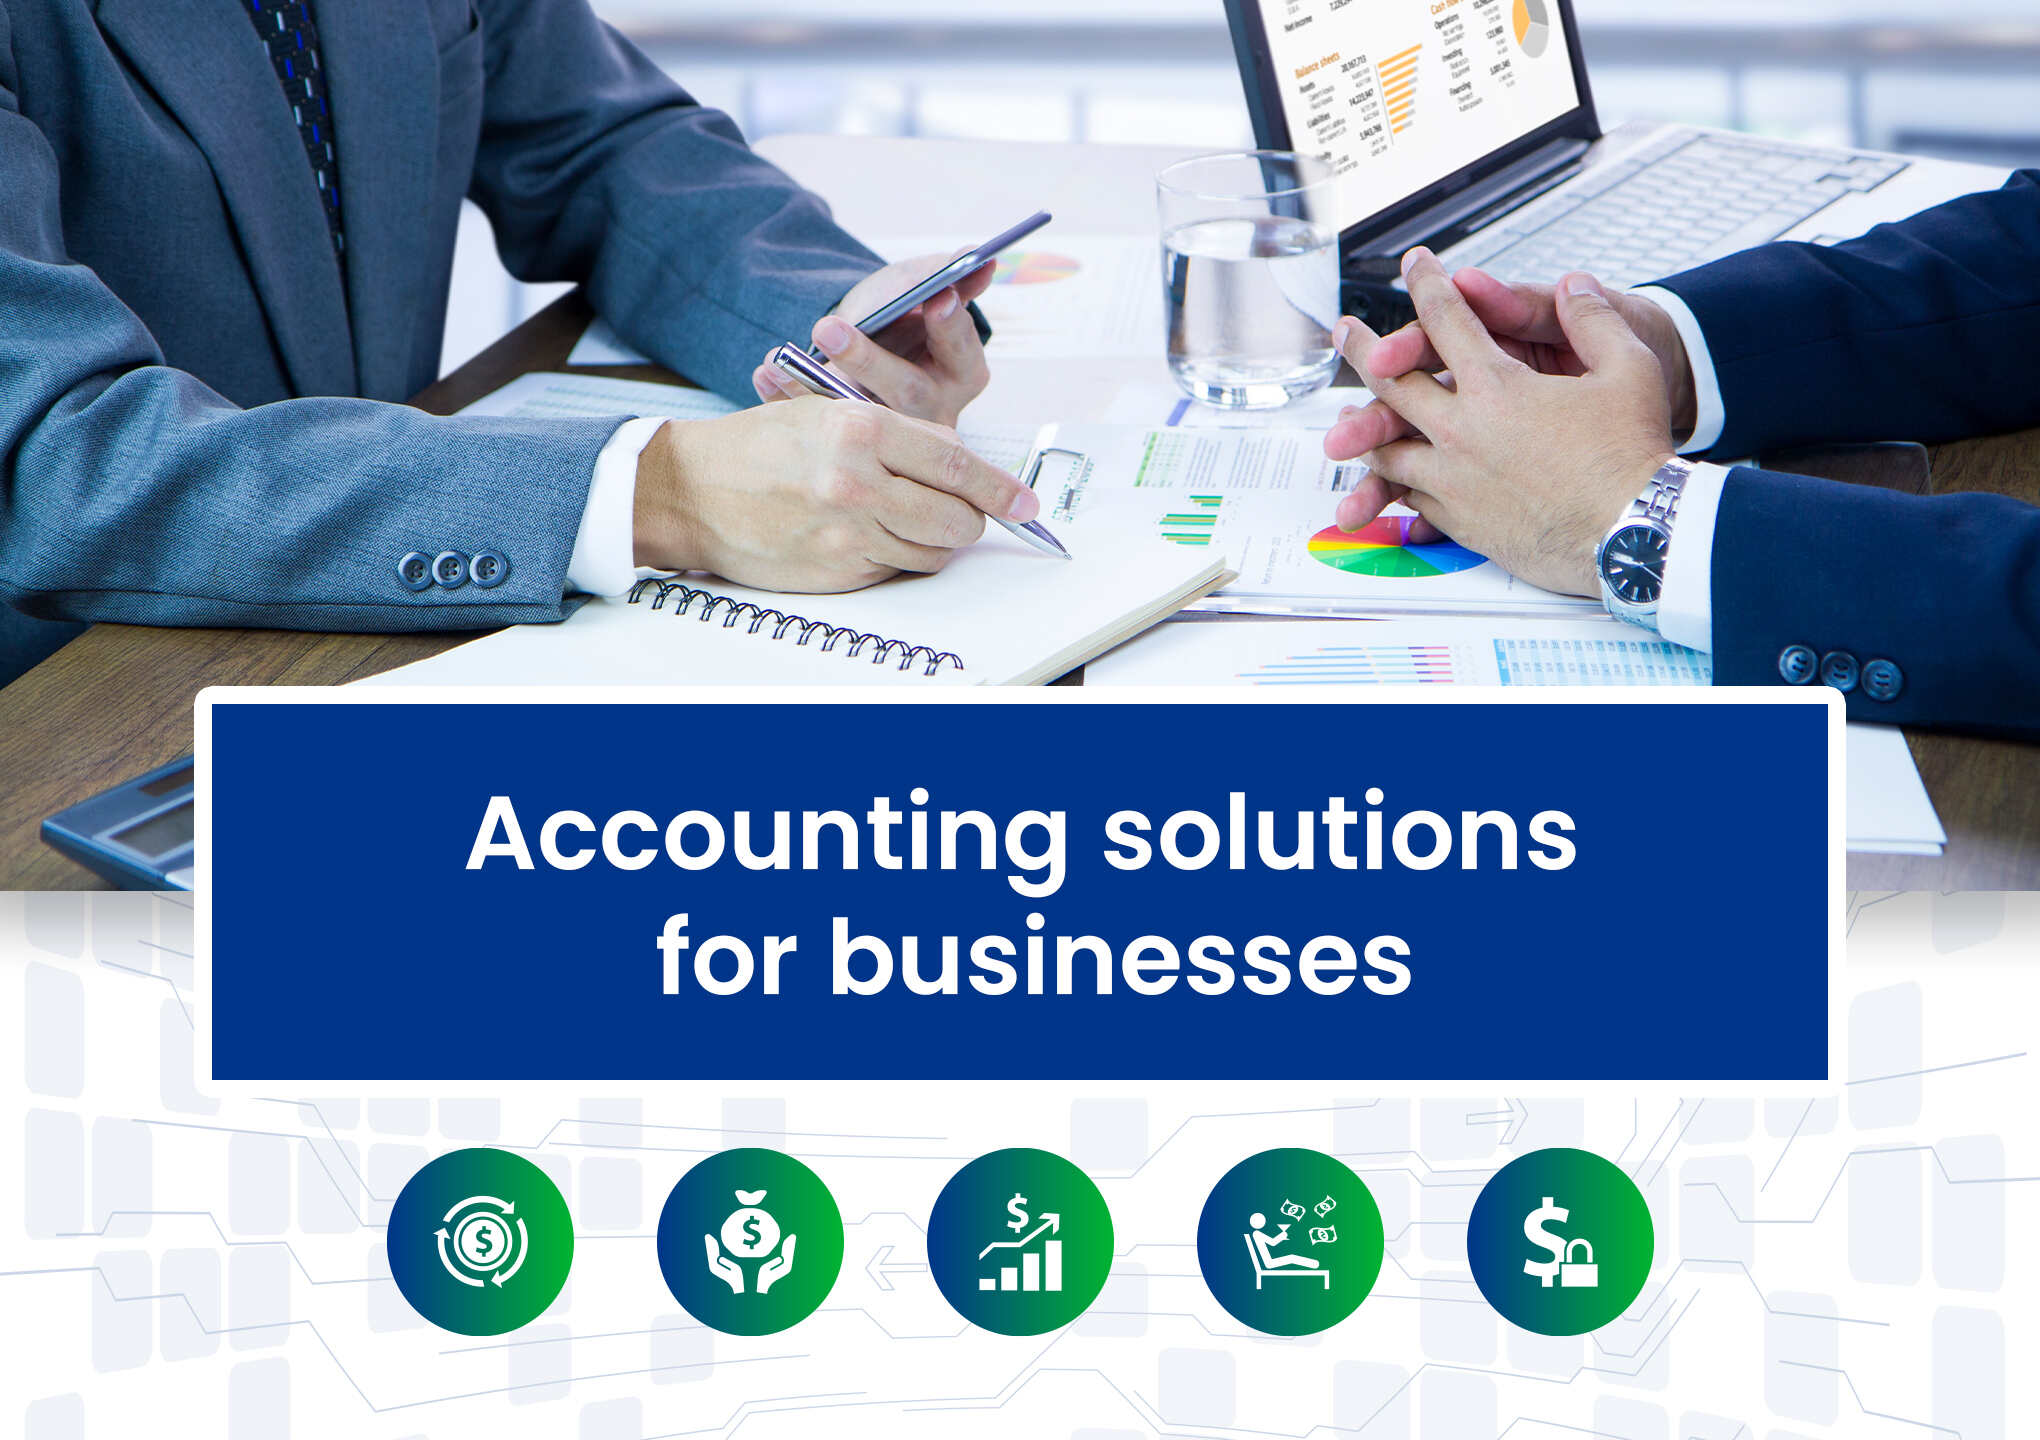 Accounting solutions for businesses - TheAllianceIQ